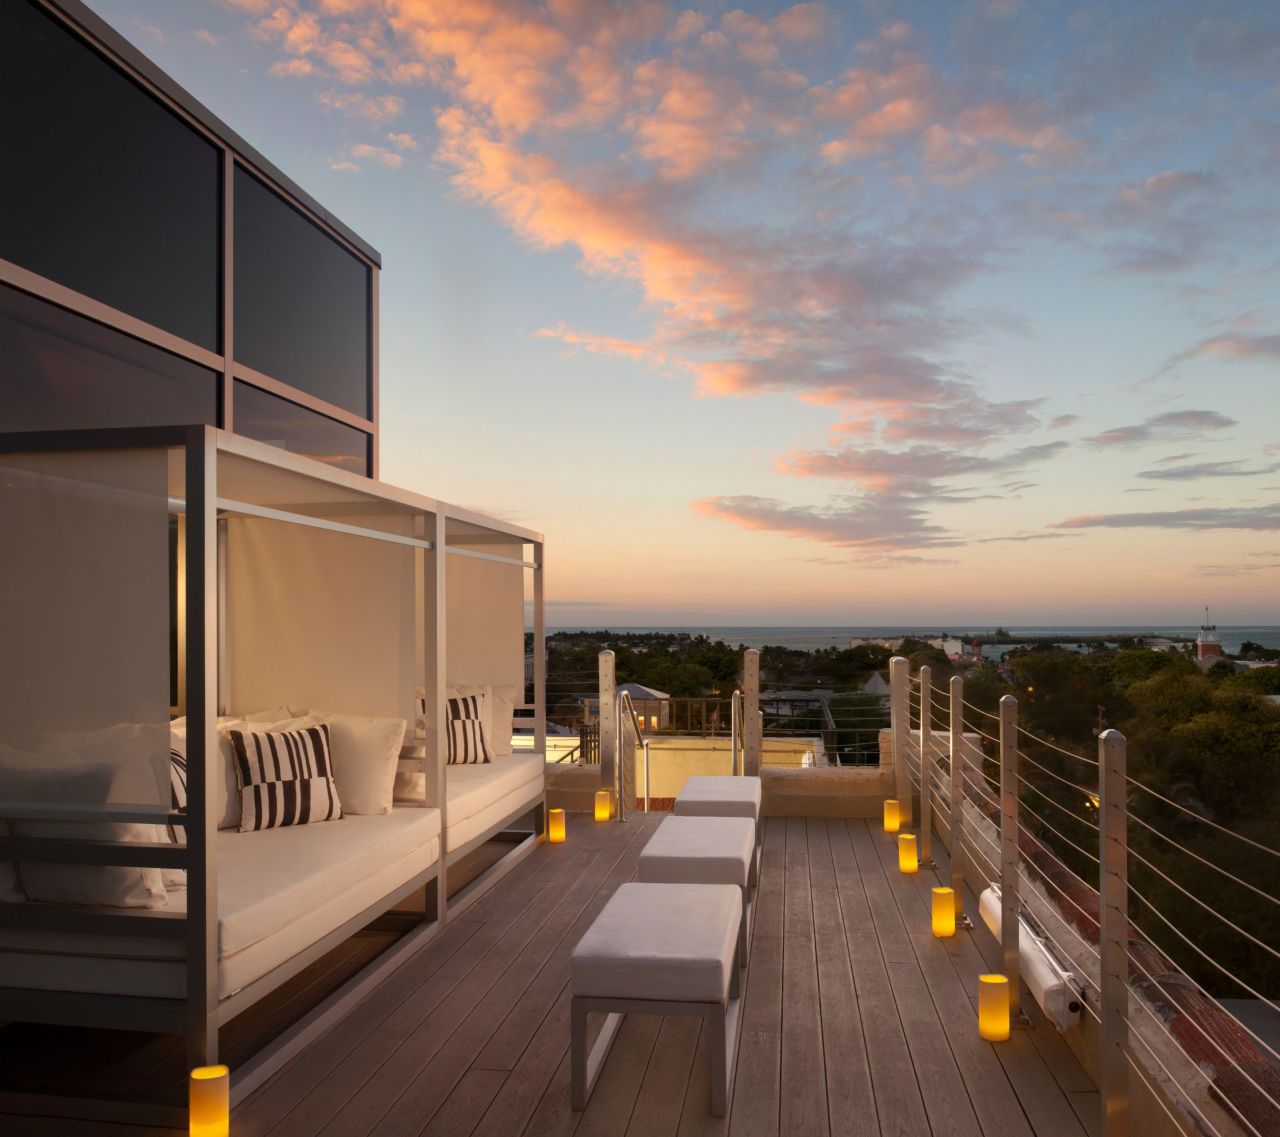 The rooftop spa at La Concha hotel offers treatment rooms and terraces with fabulous views.